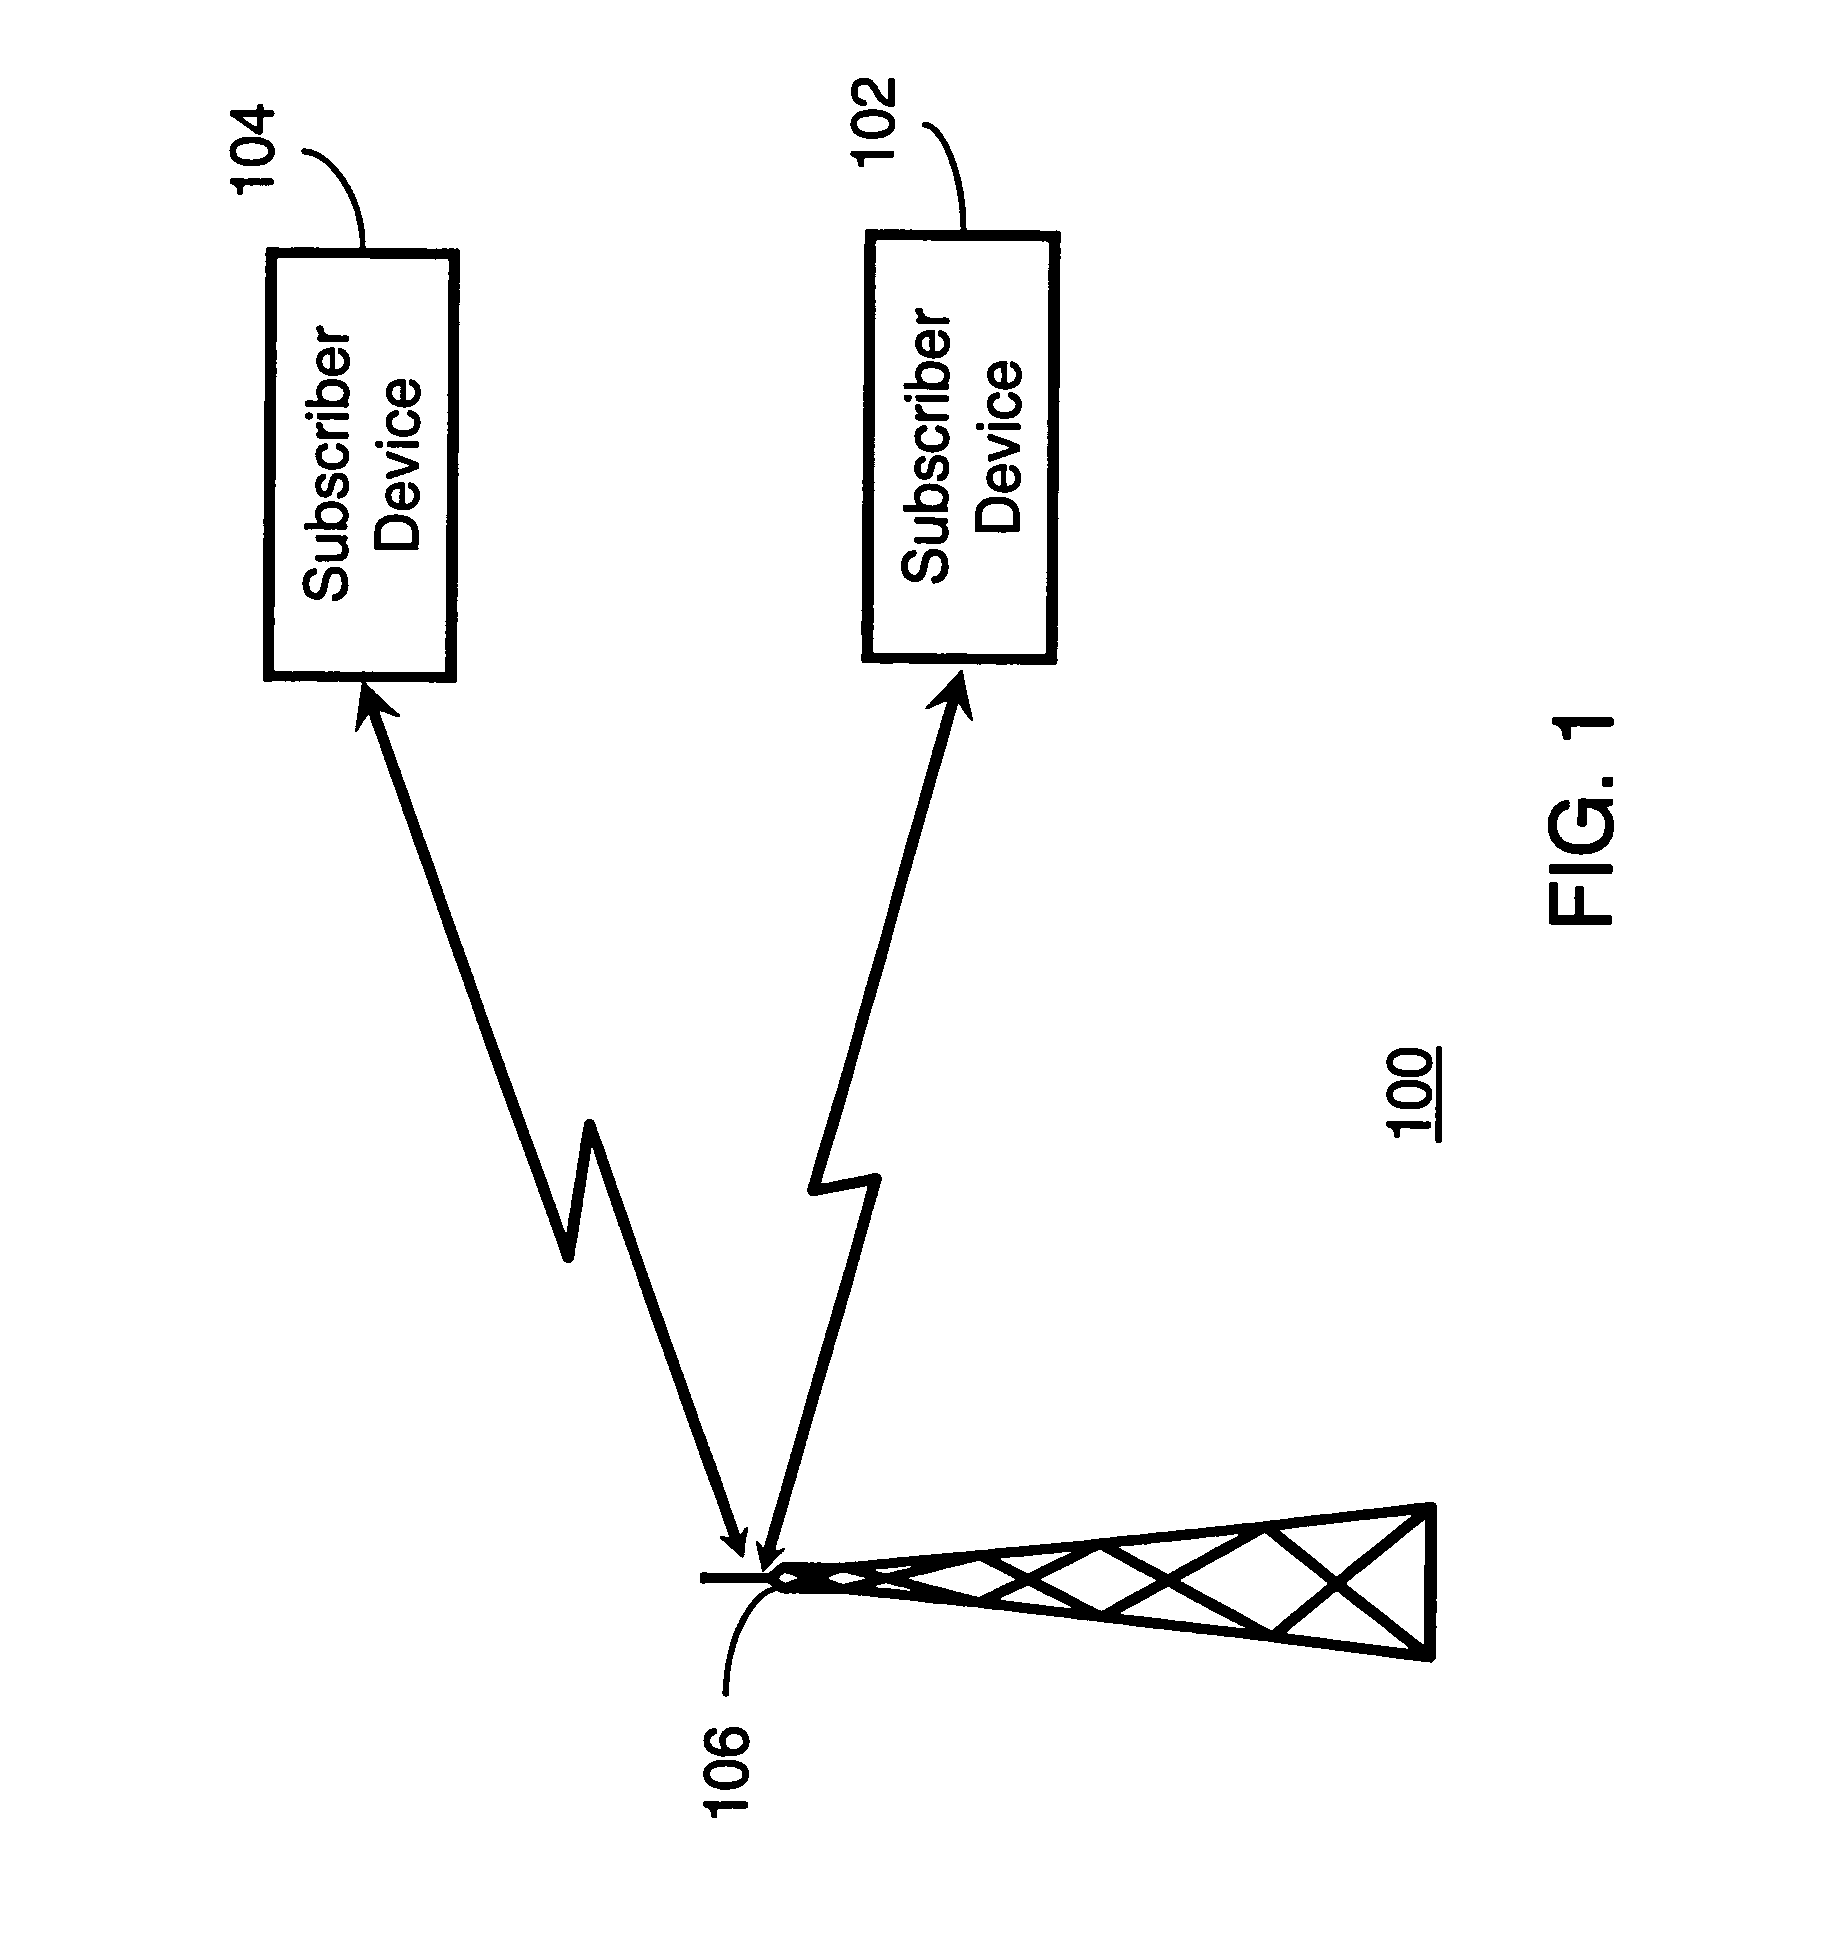 Method and system for allocating subcarriers to subscriber devices